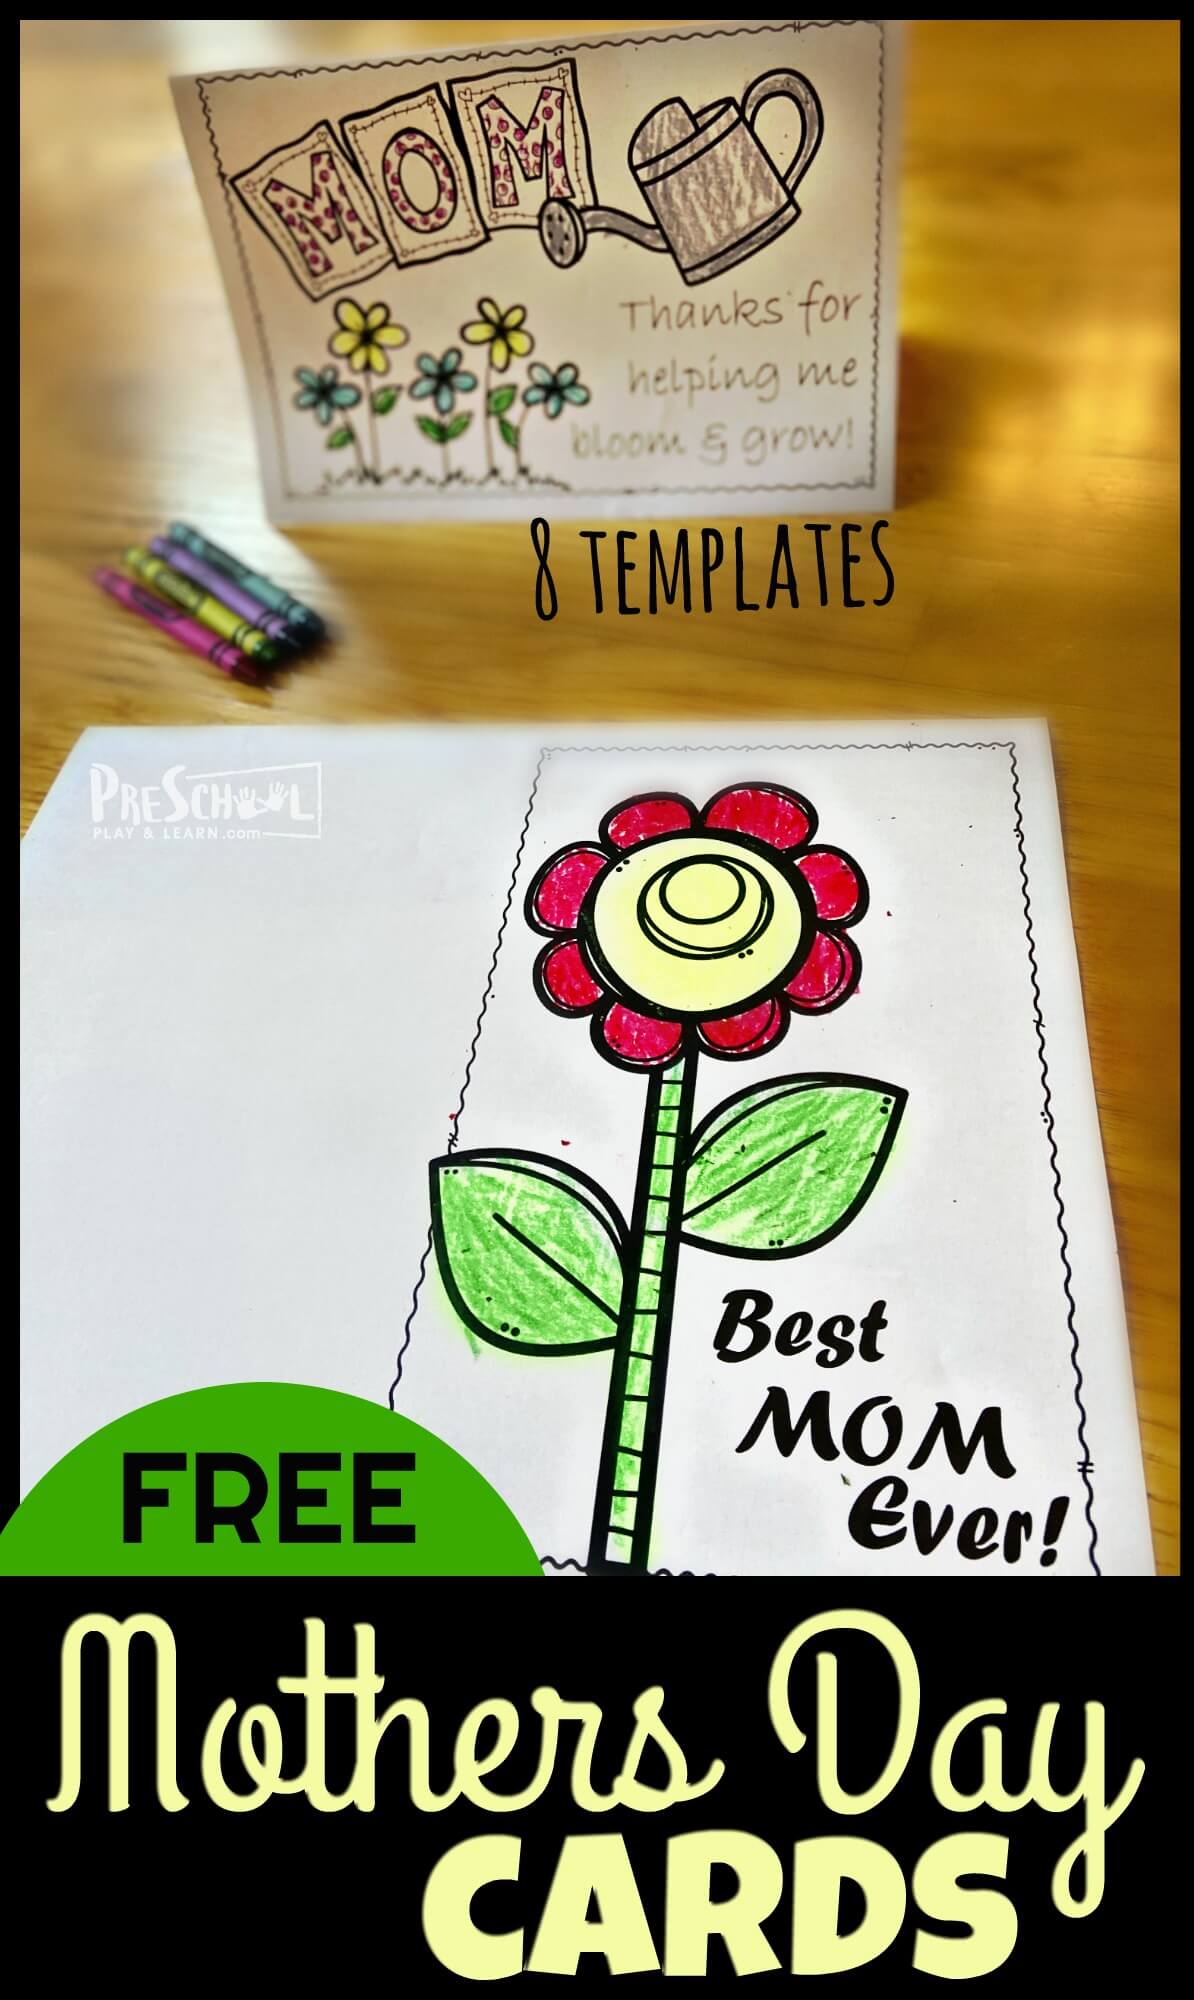 Tie-Dye Card Anyone? Learn How to Make This Cool Idea for a Card 